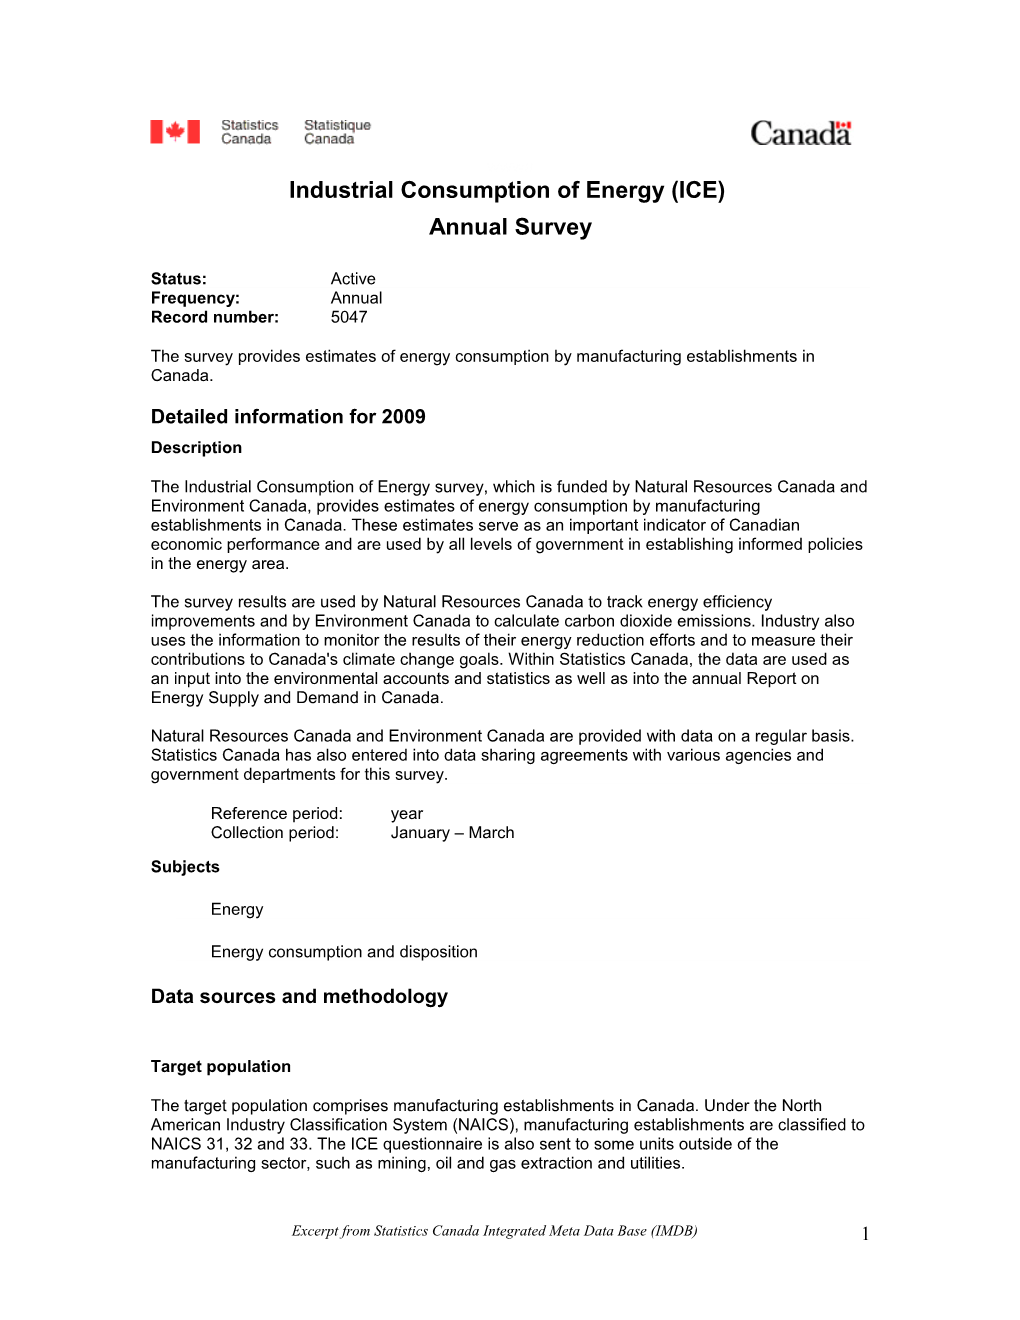 Annual Industrial Consumption of Energy Survey (ICE)